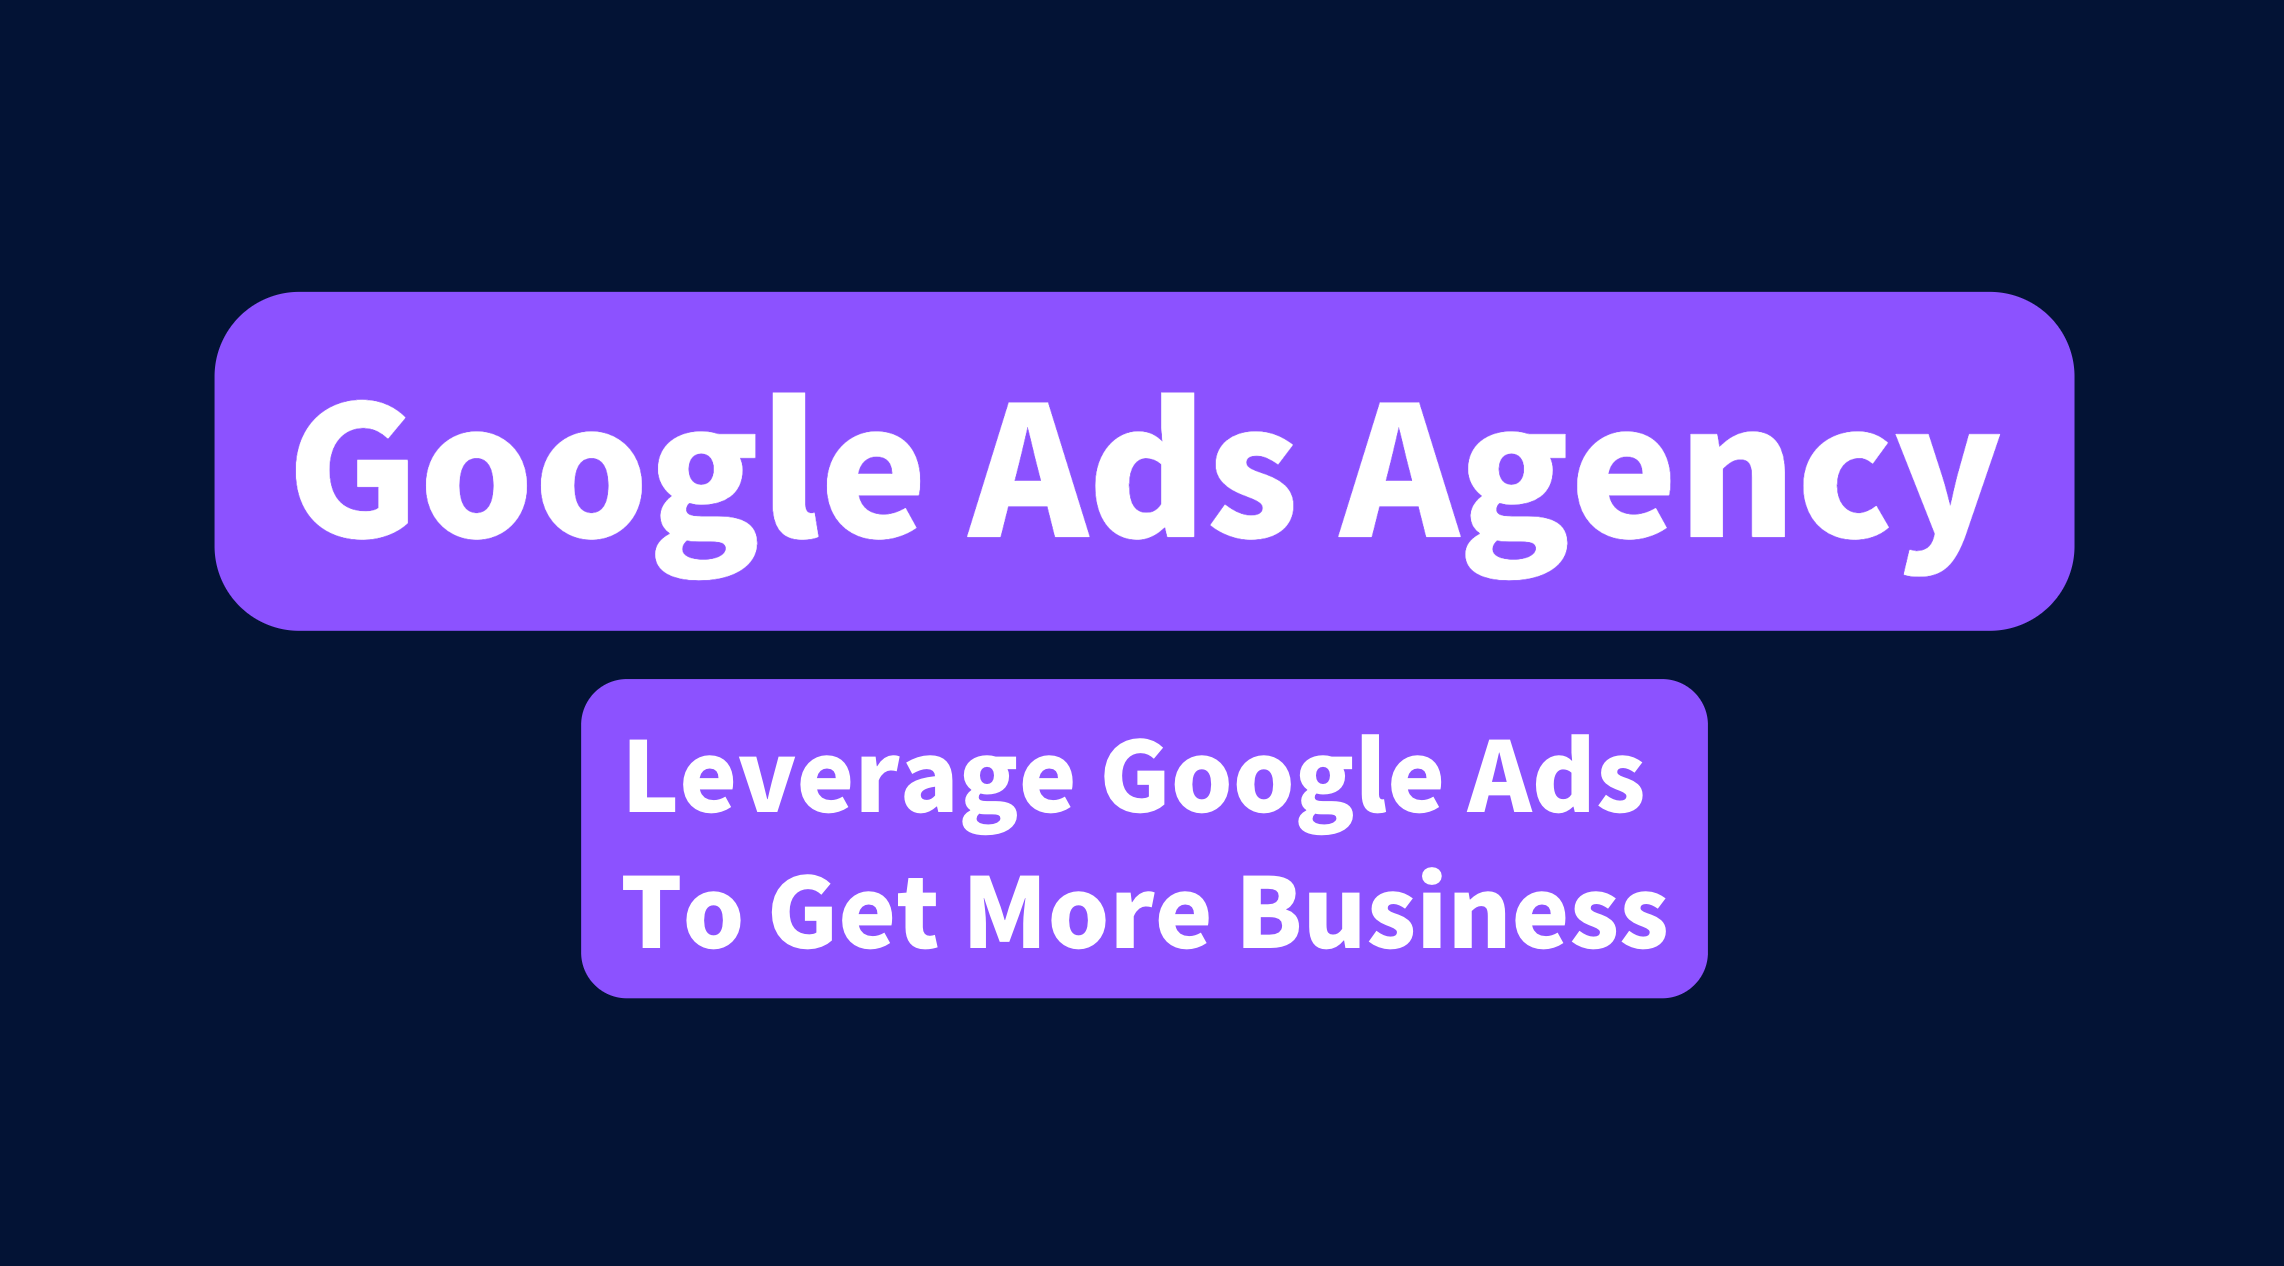 Google Ads Agency - Leverage Google Ads To Get More Business